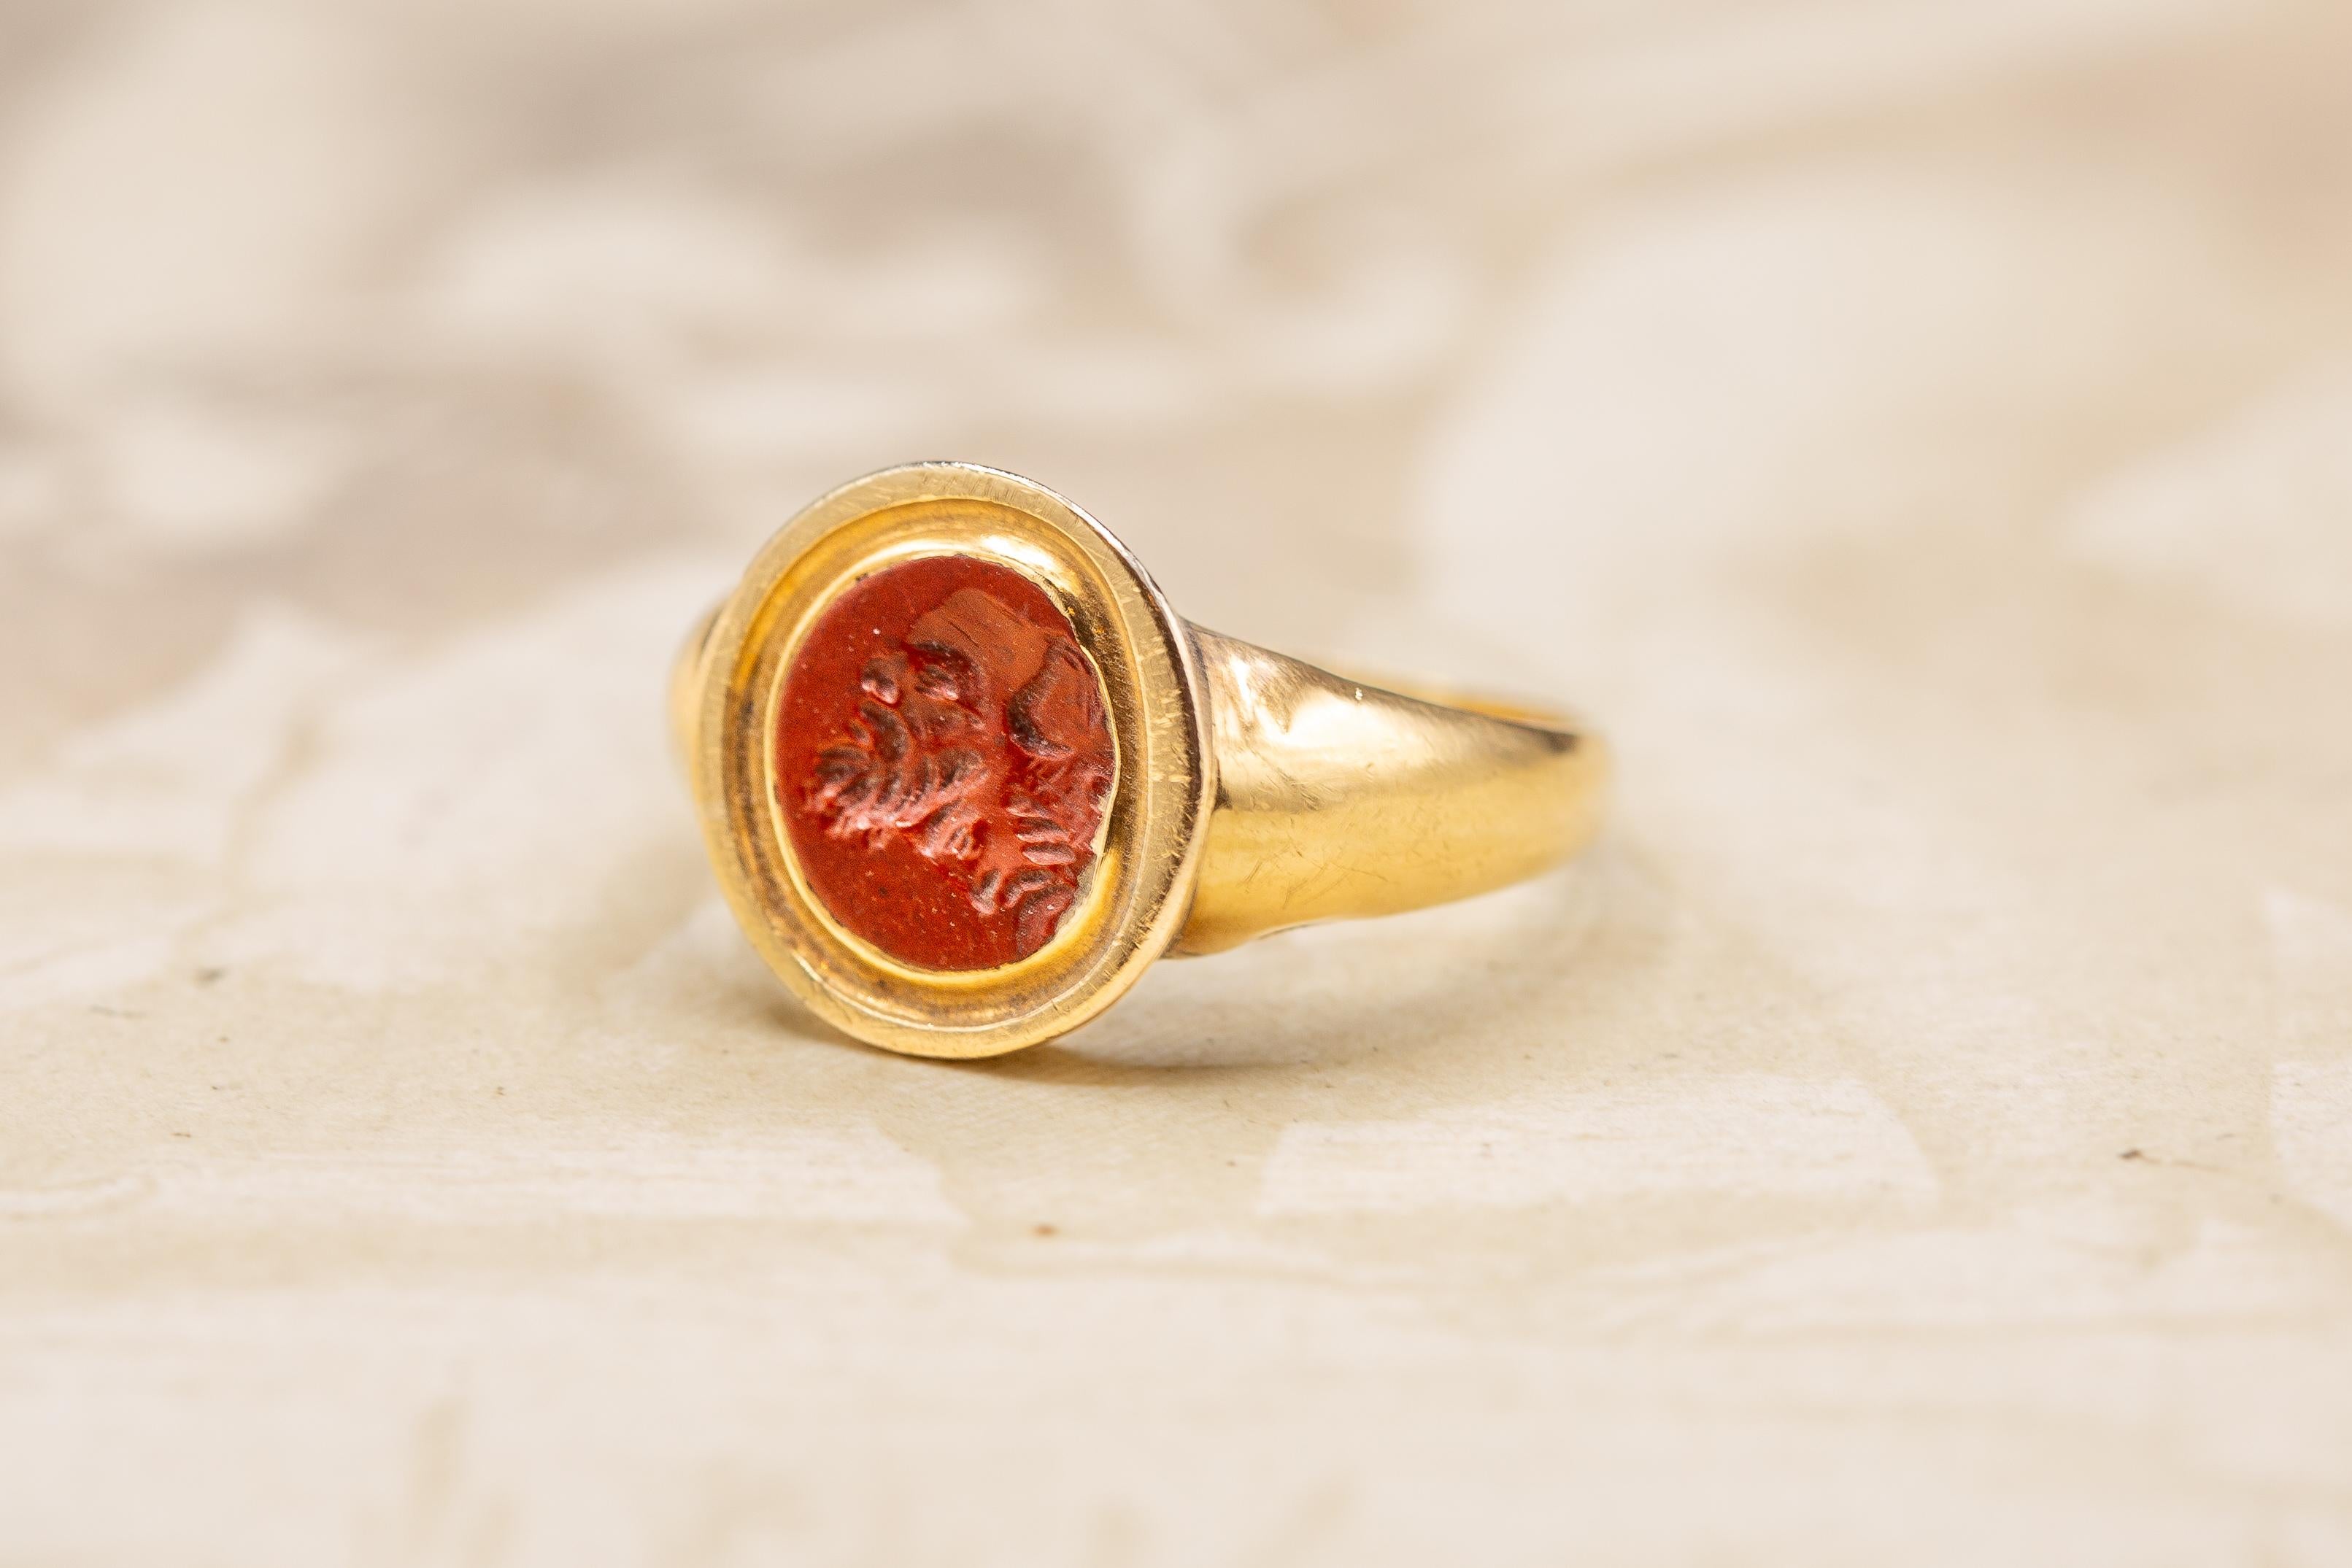 Oval Cut Ancient Roman Carved Red Jasper Gryllus Signet Ring Antique Georgian  For Sale